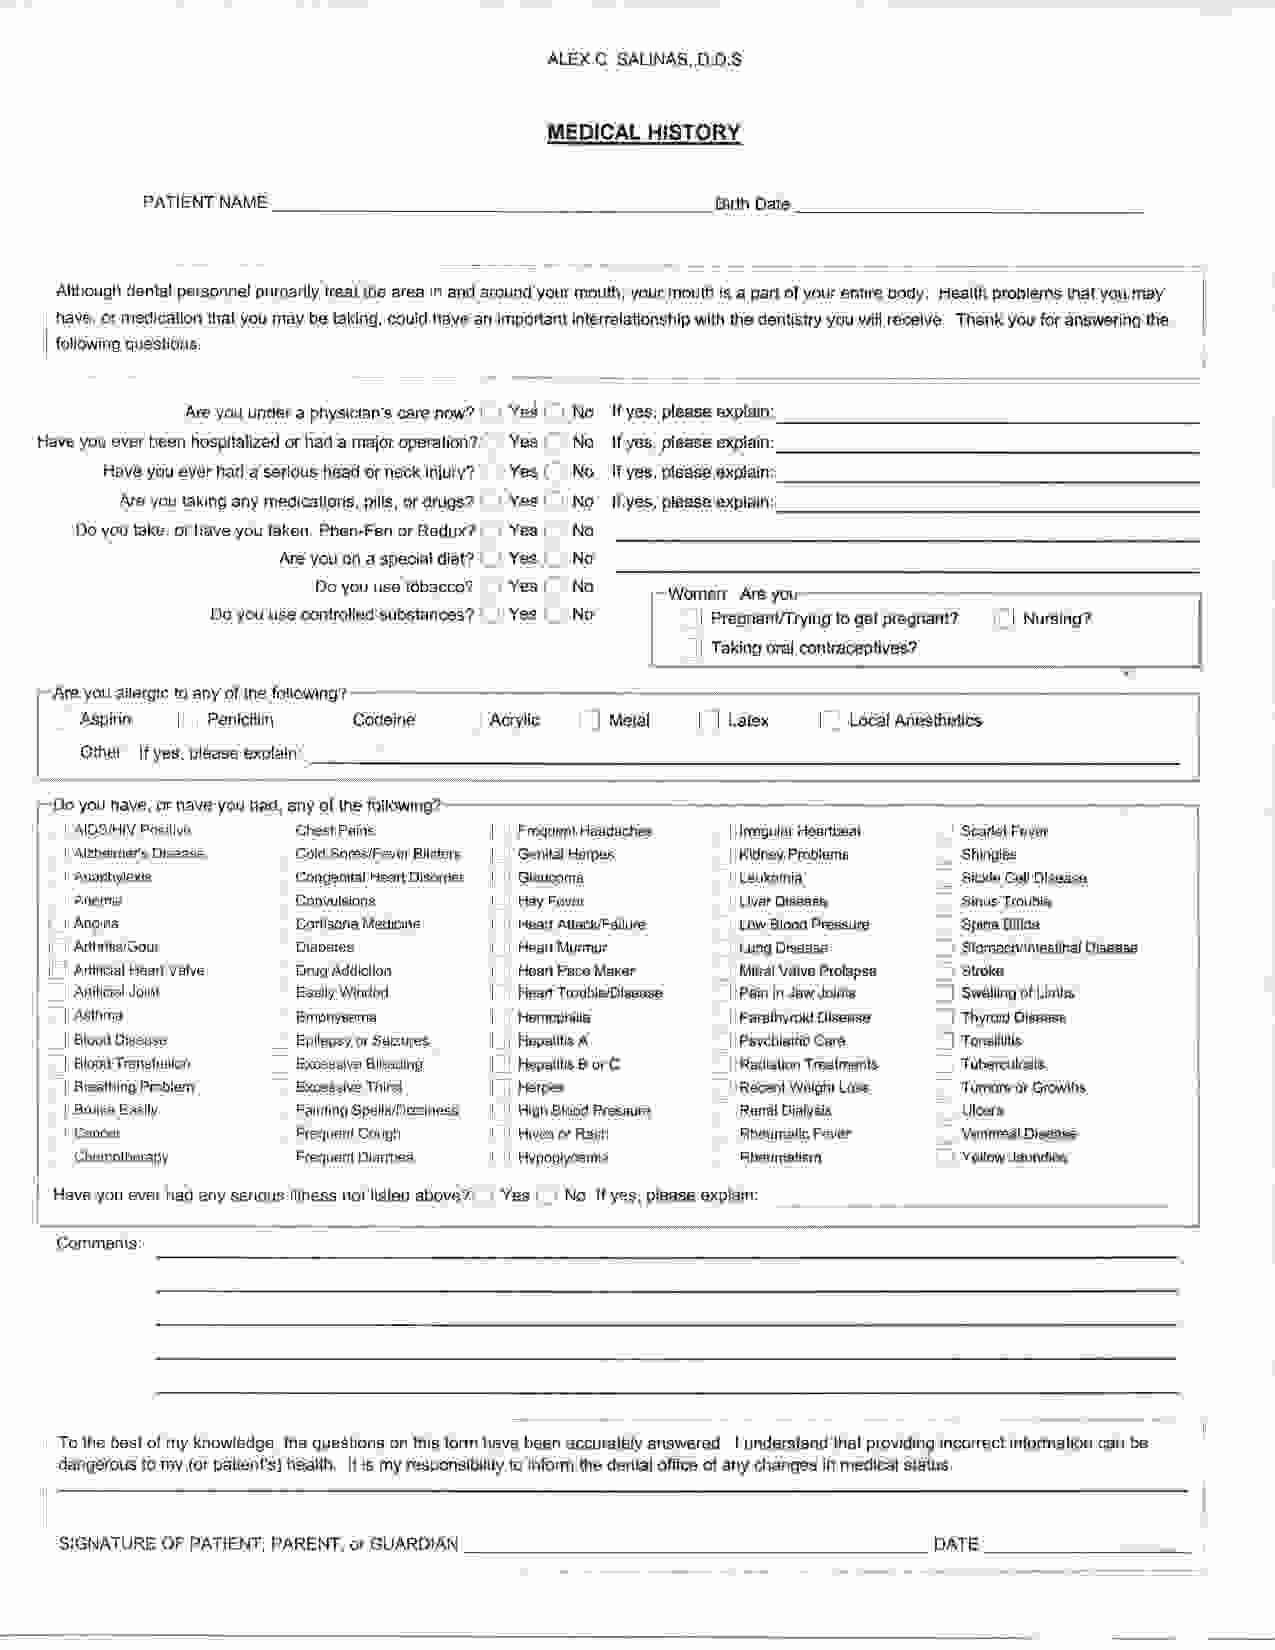 Free Printable Office forms Fresh Medical History form for Dental Fice